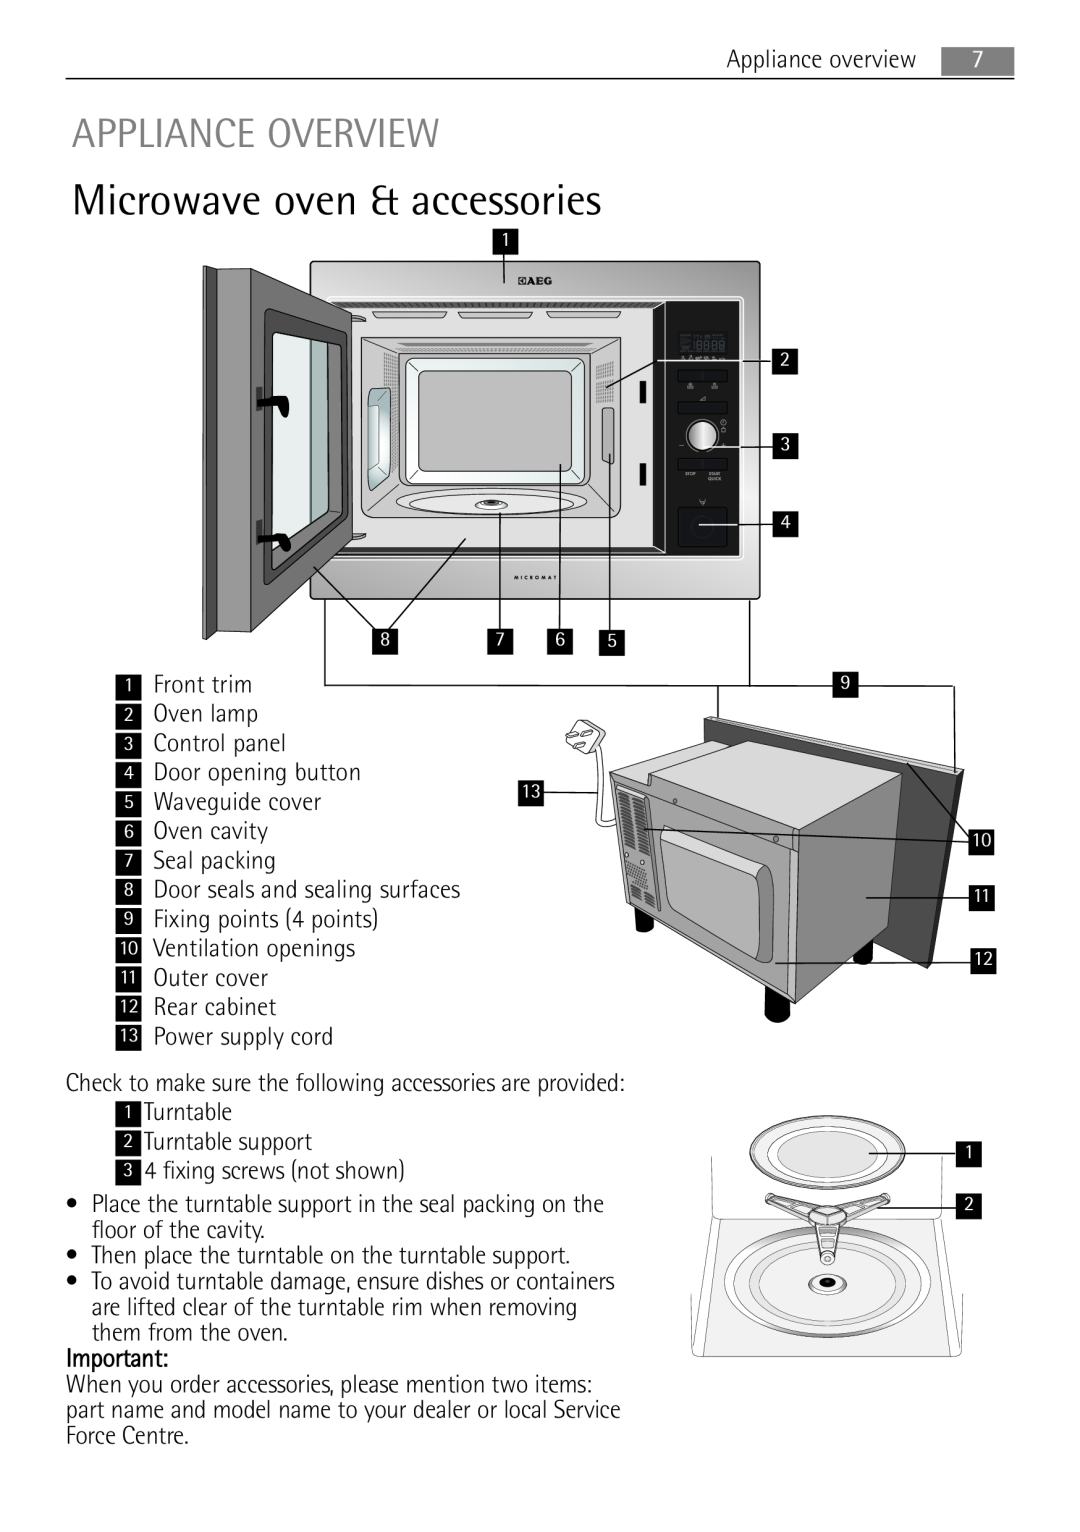 AEG MC1753E Microwave oven & accessories, Appliance Overview, Front trim, Oven lamp, Control panel, Door opening button 